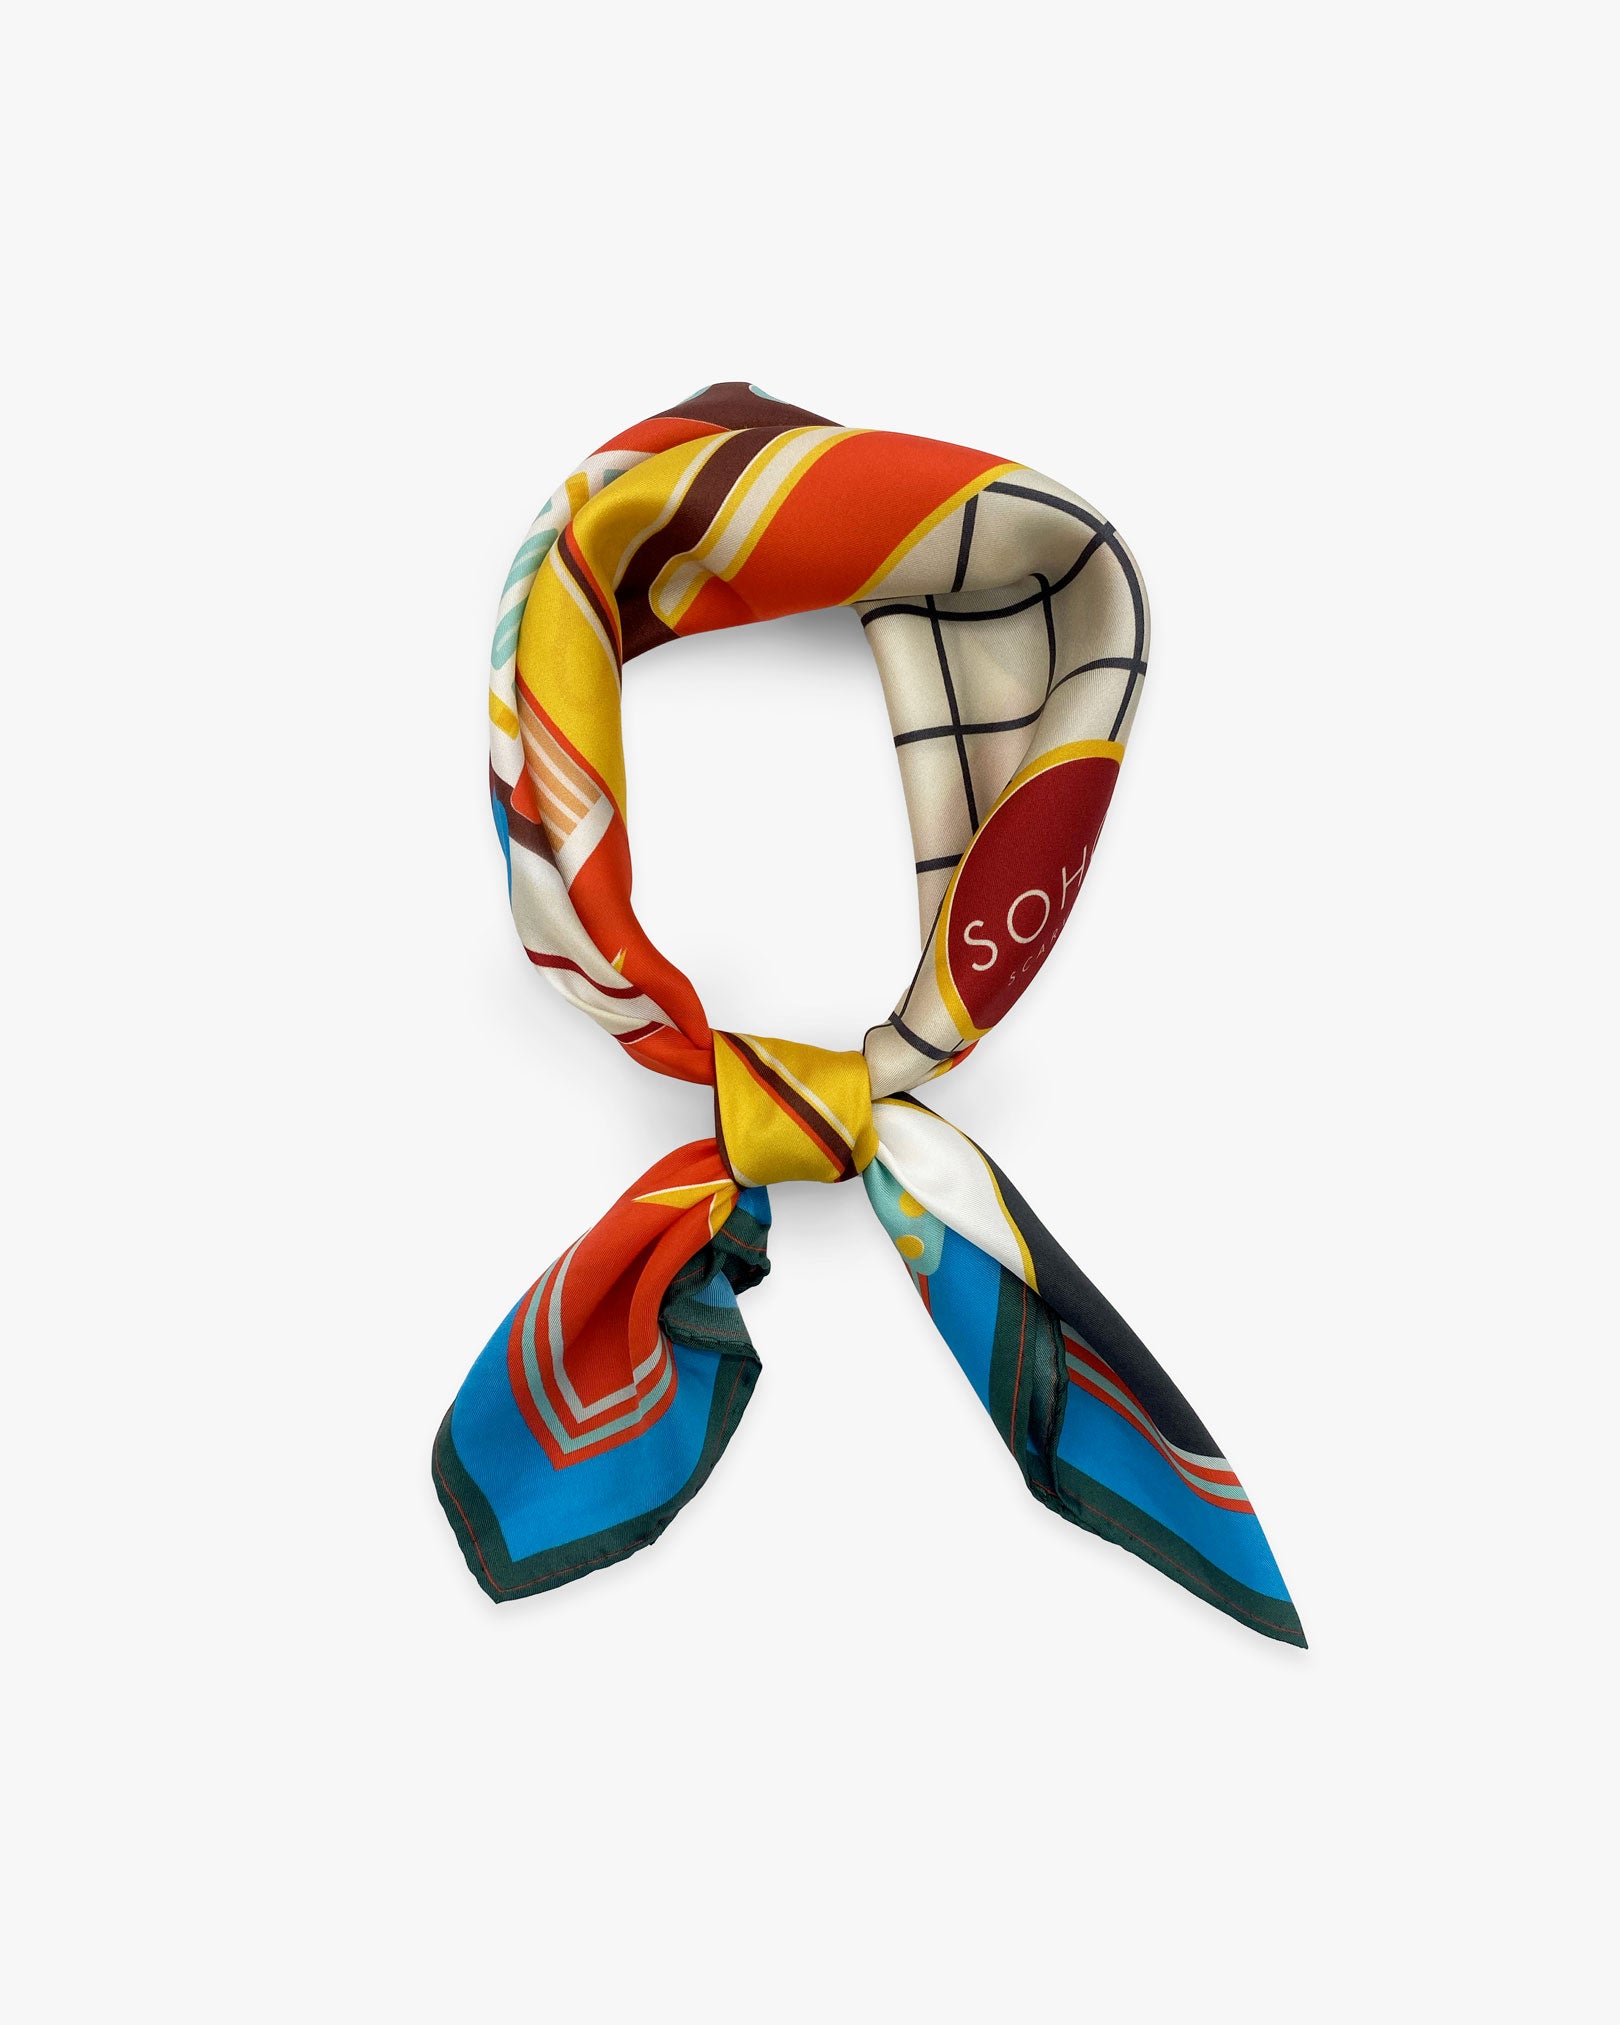 The 'Jukebox' silk pocket square from SOHO Scarves knotted and looped against a white background.